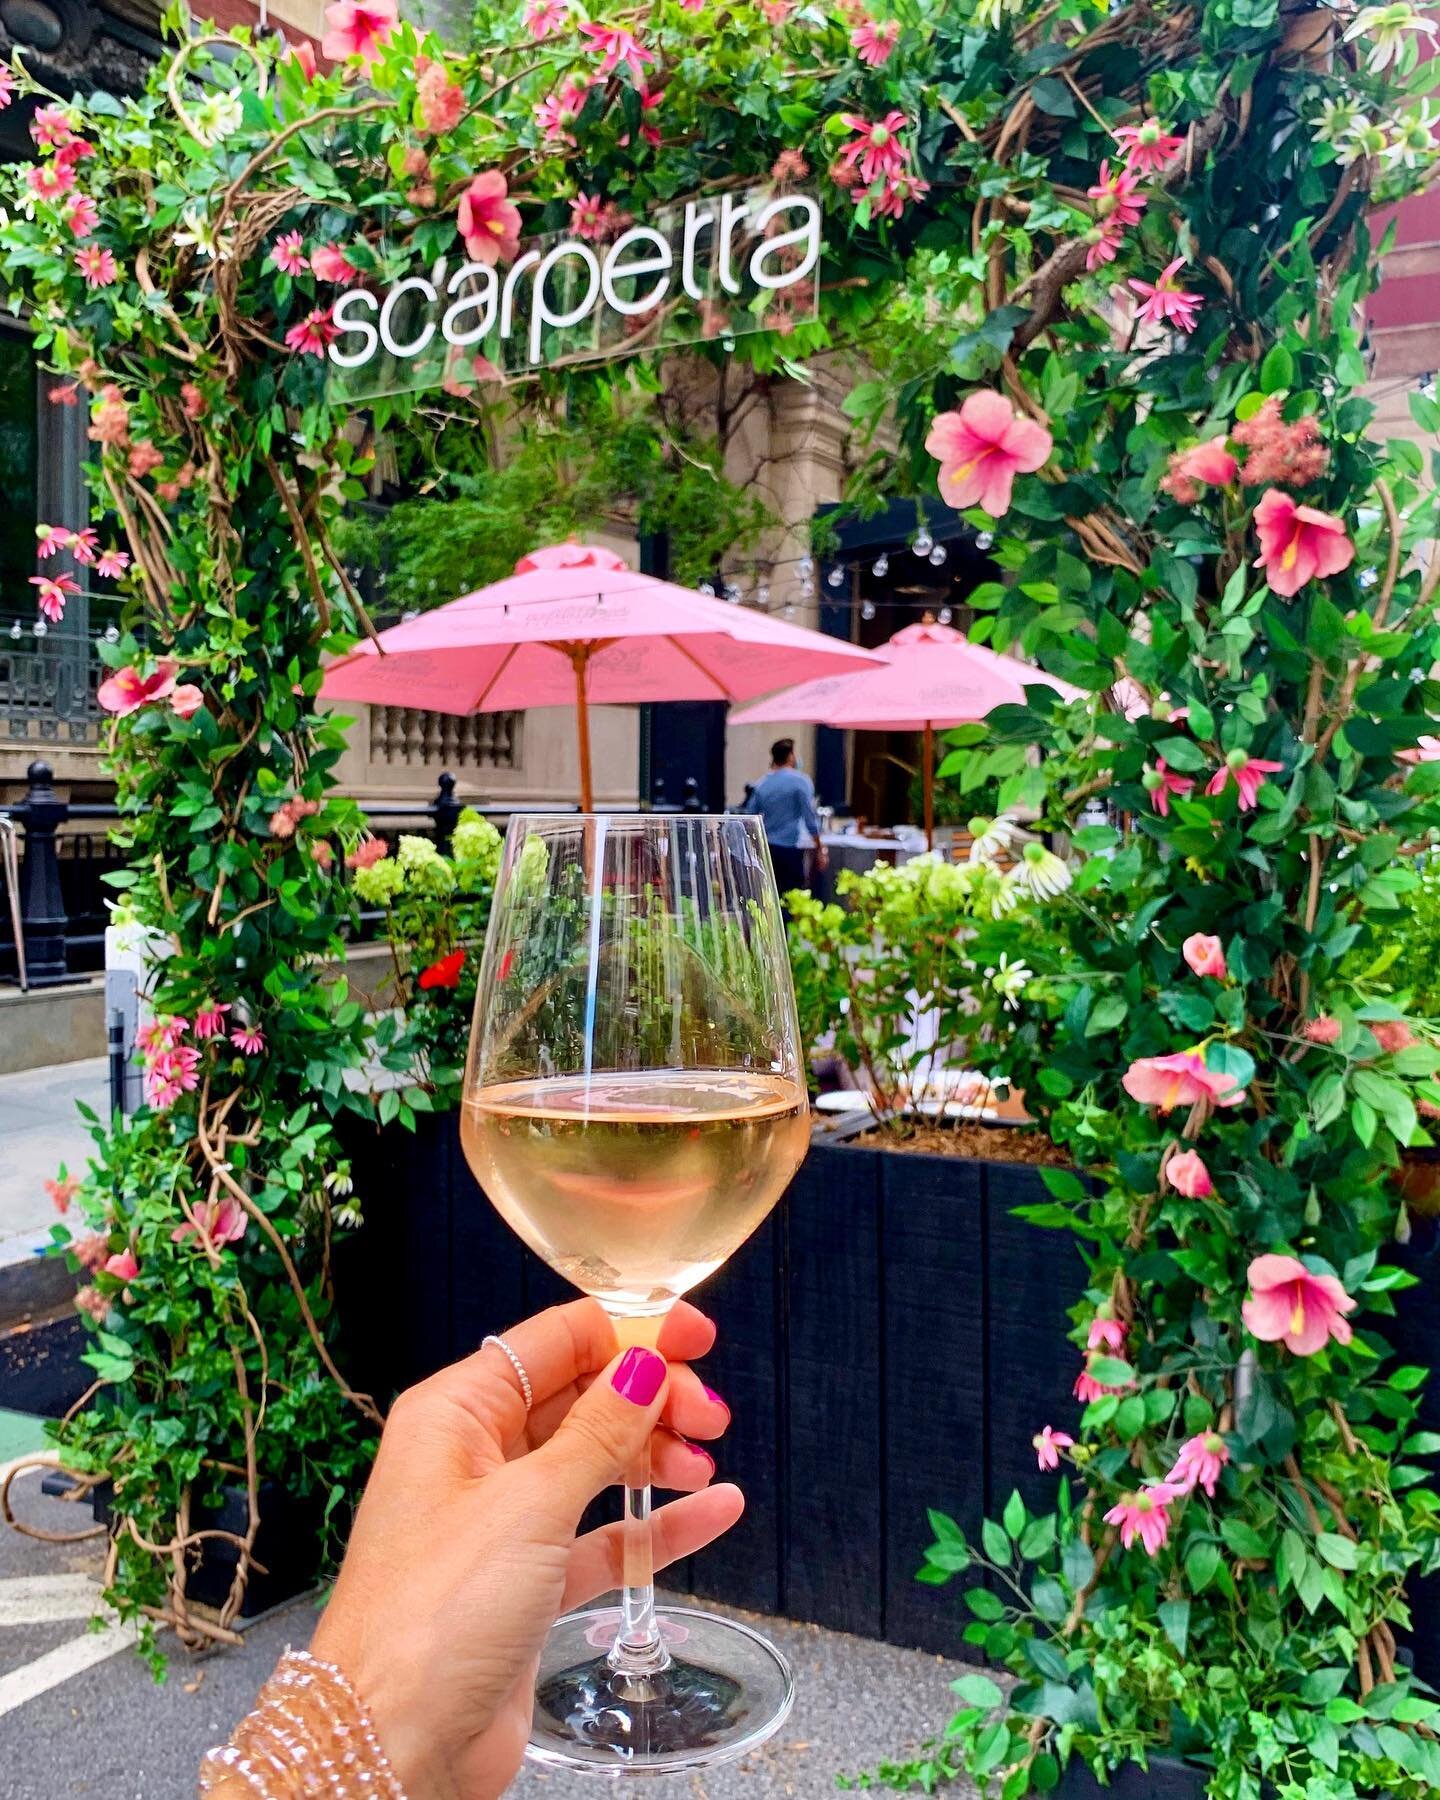 Aperitivo al fresco 🍷🌸
Outdoor dining is blooming in New York &mdash; and there&rsquo;s still plenty of time to take in all the stunning setups spilling onto the city&rsquo;s sidewalks and streets (rooftops, too). Scarpetta's Outdoor Garden Café, 